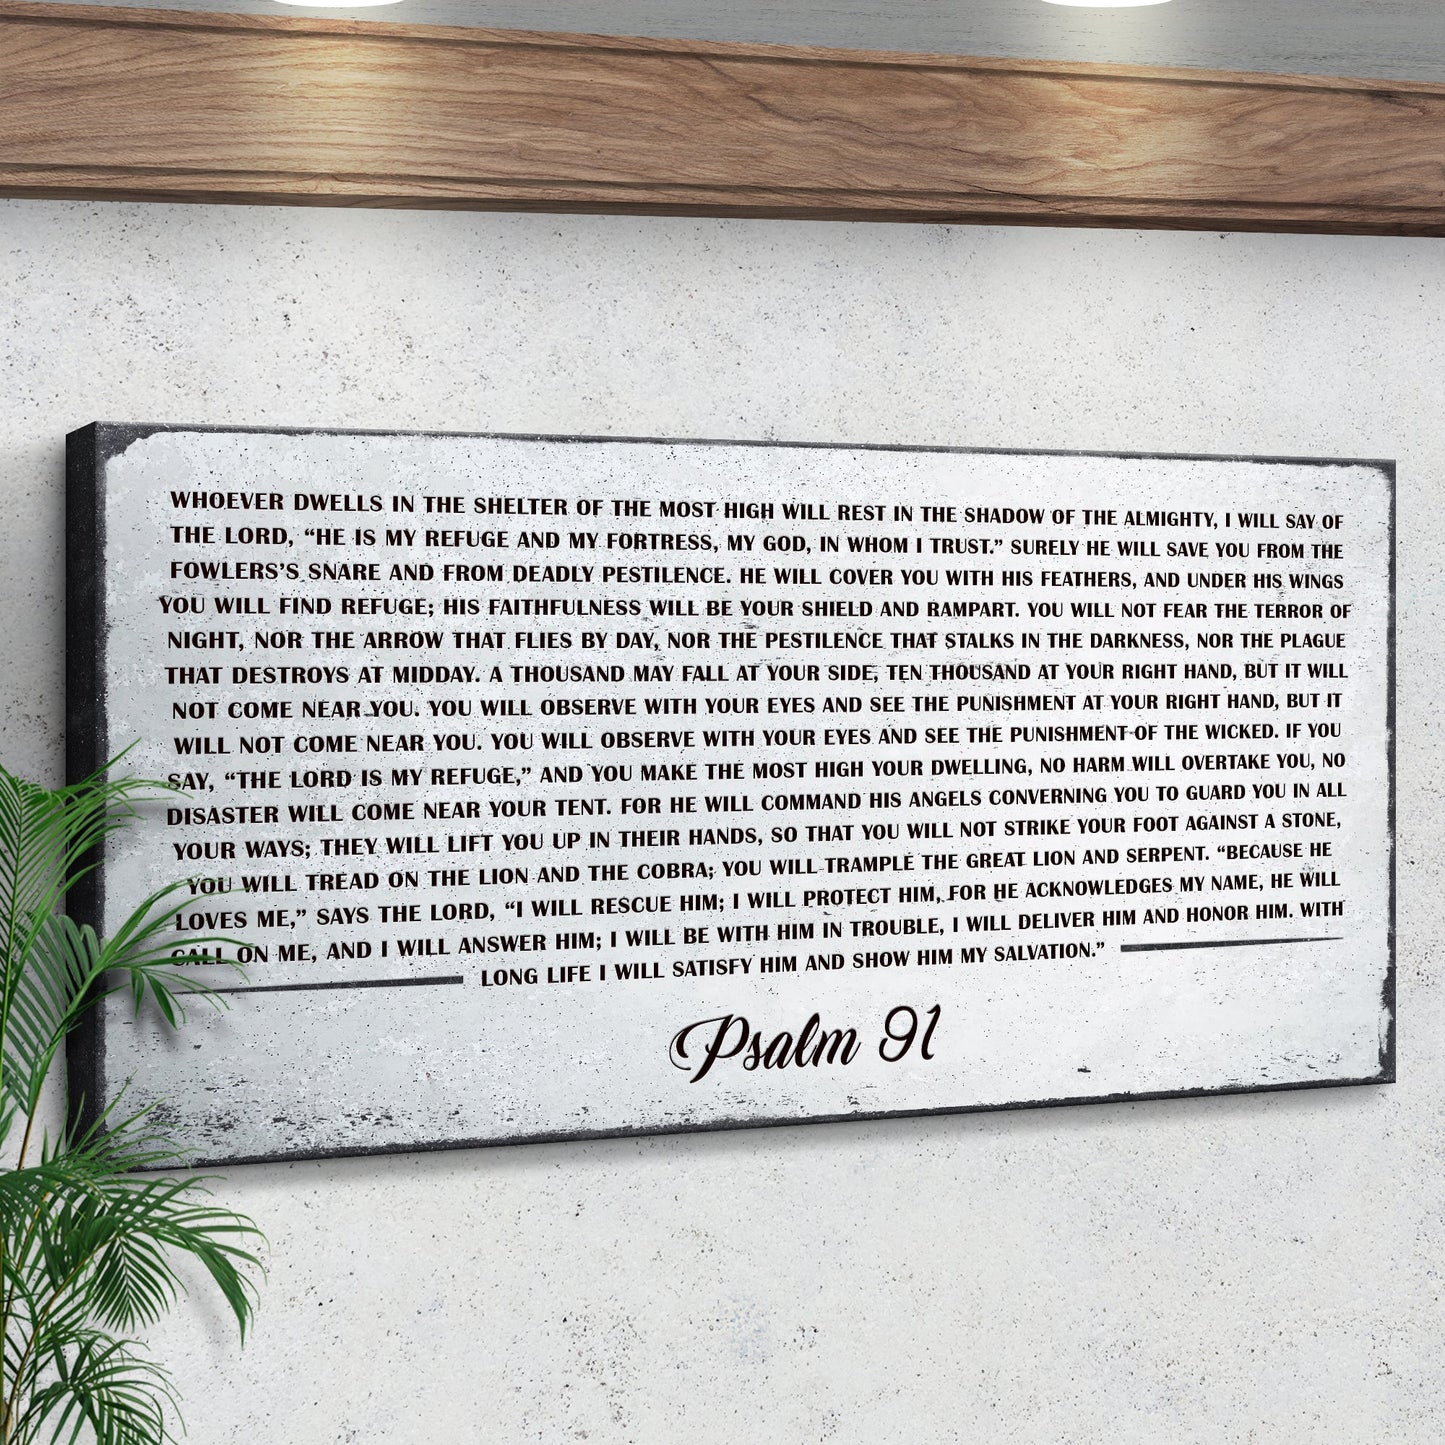 Psalm 91 - Whoever Dwells In The Shelter Of The Most High Sign IV Style 2 - Image by Tailored Canvases